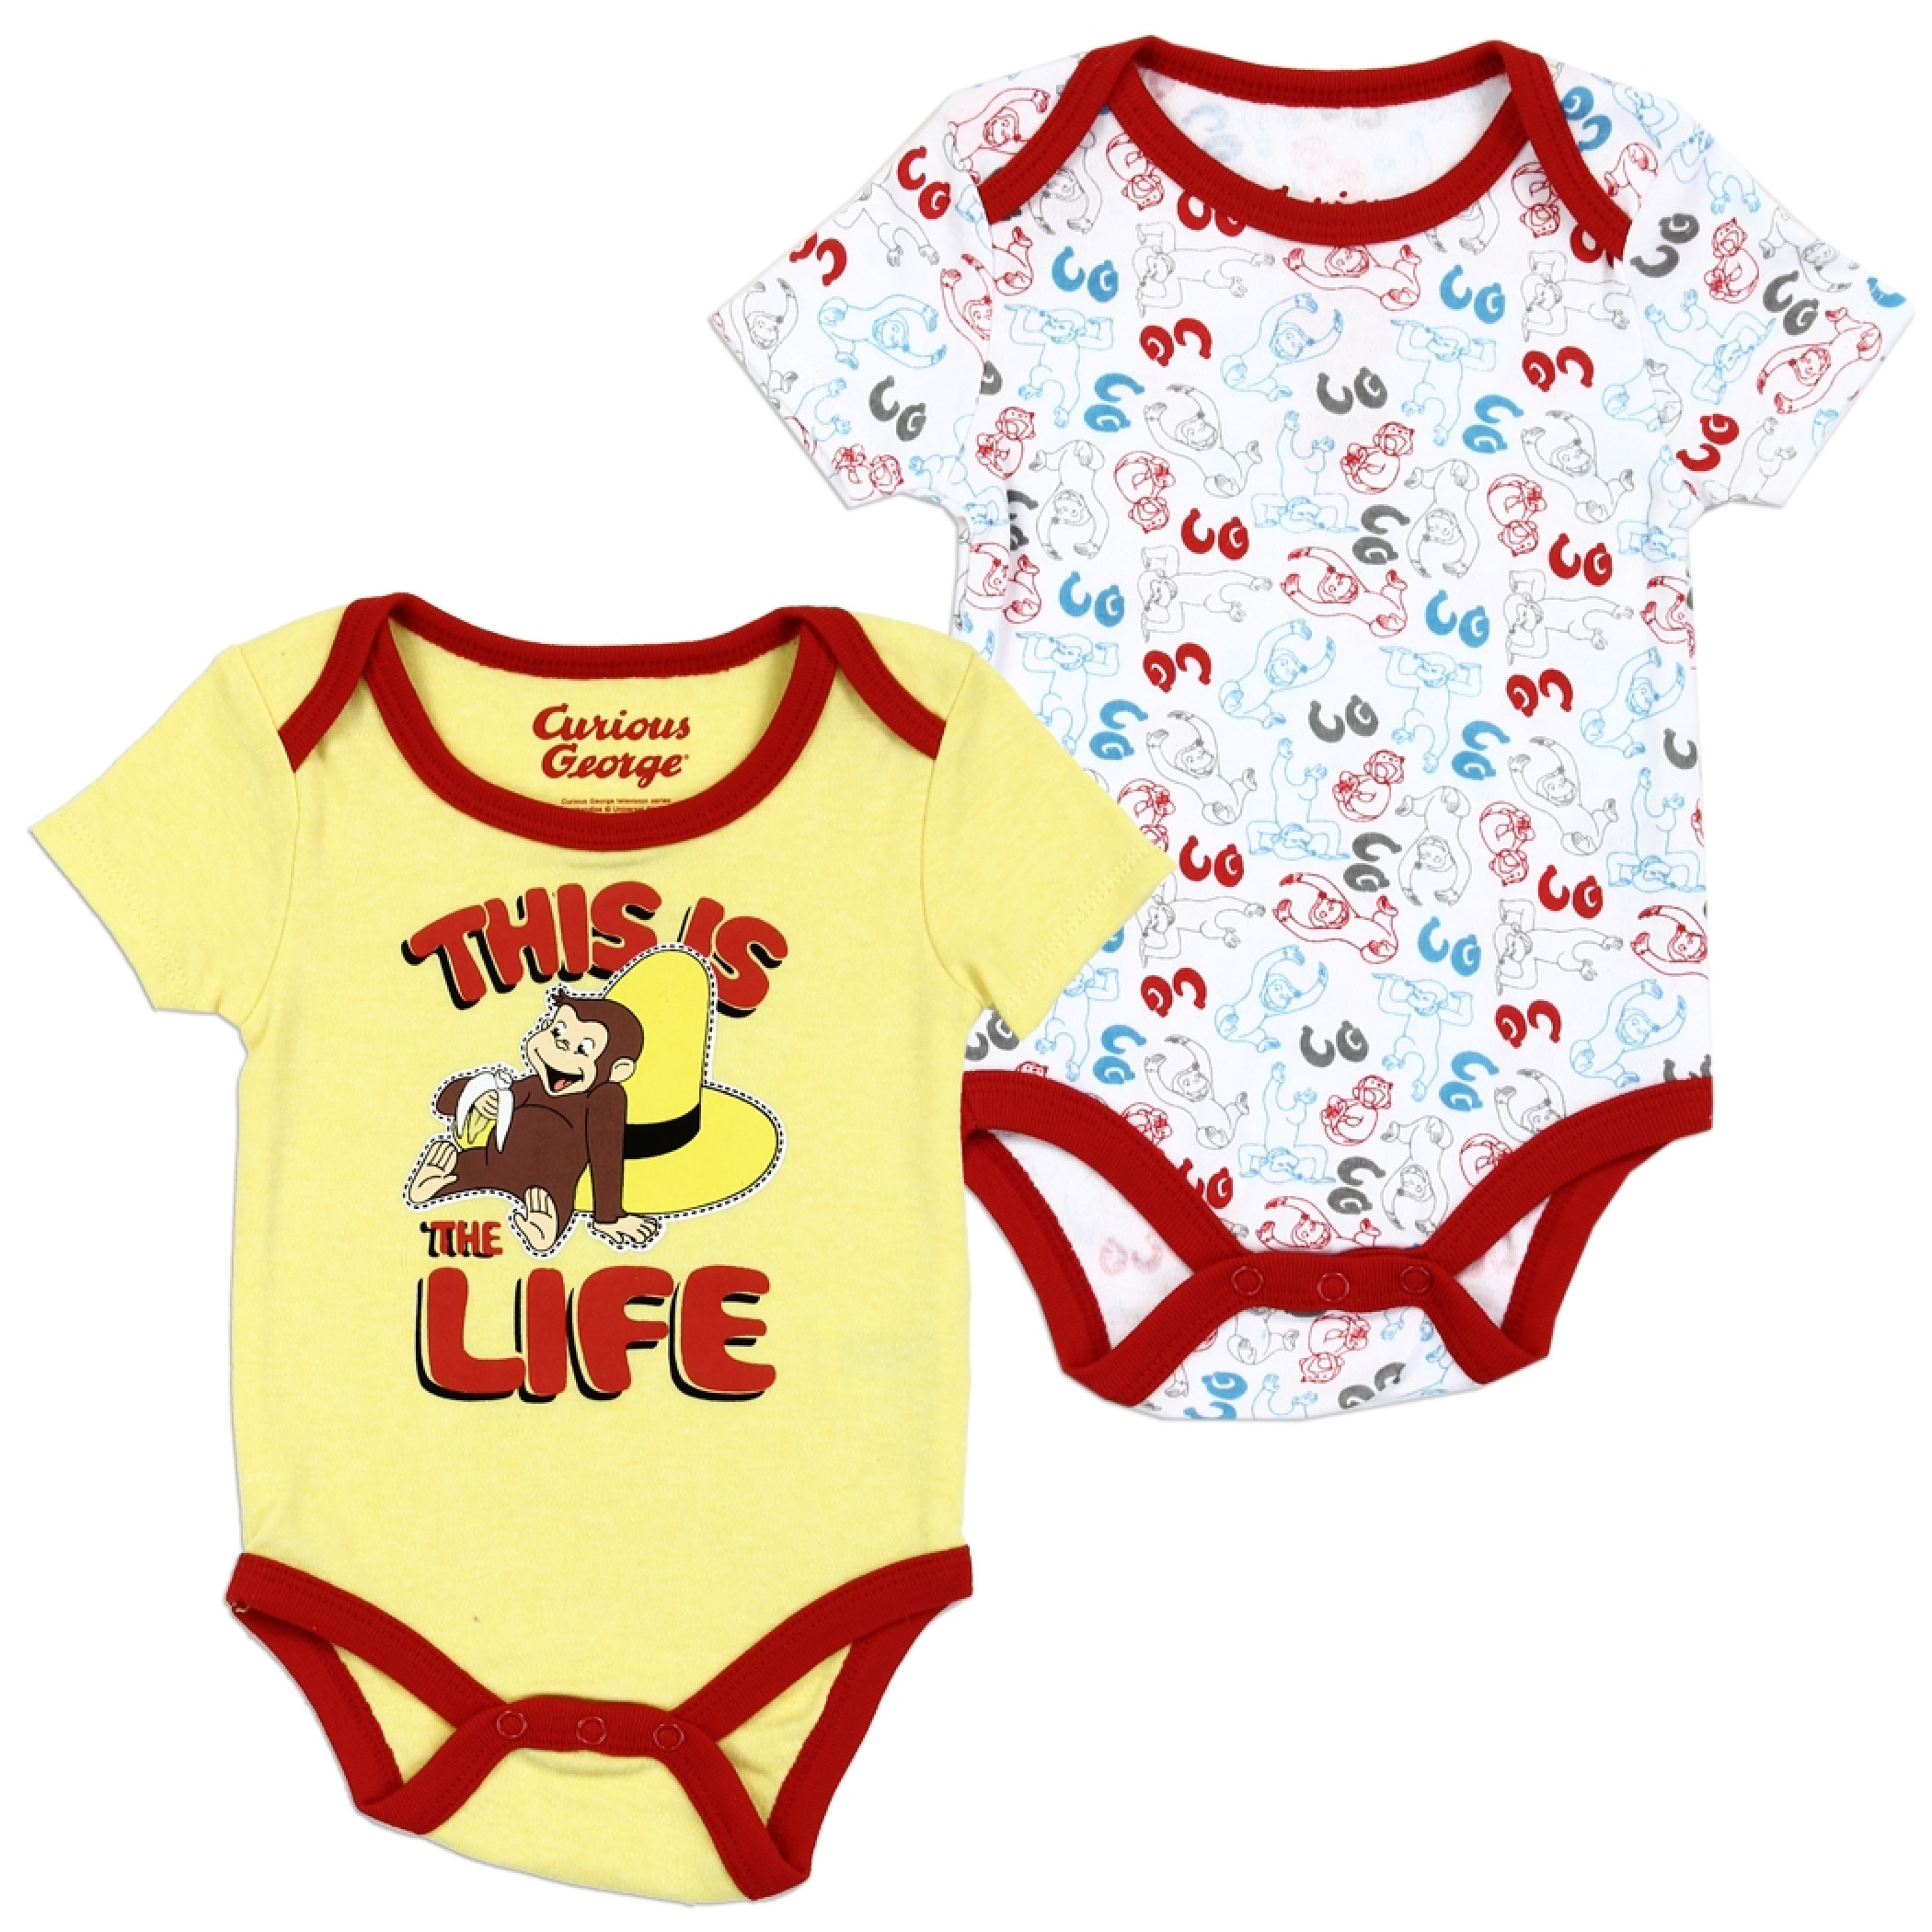 Curious George Infant Snapsuit 2 Pack